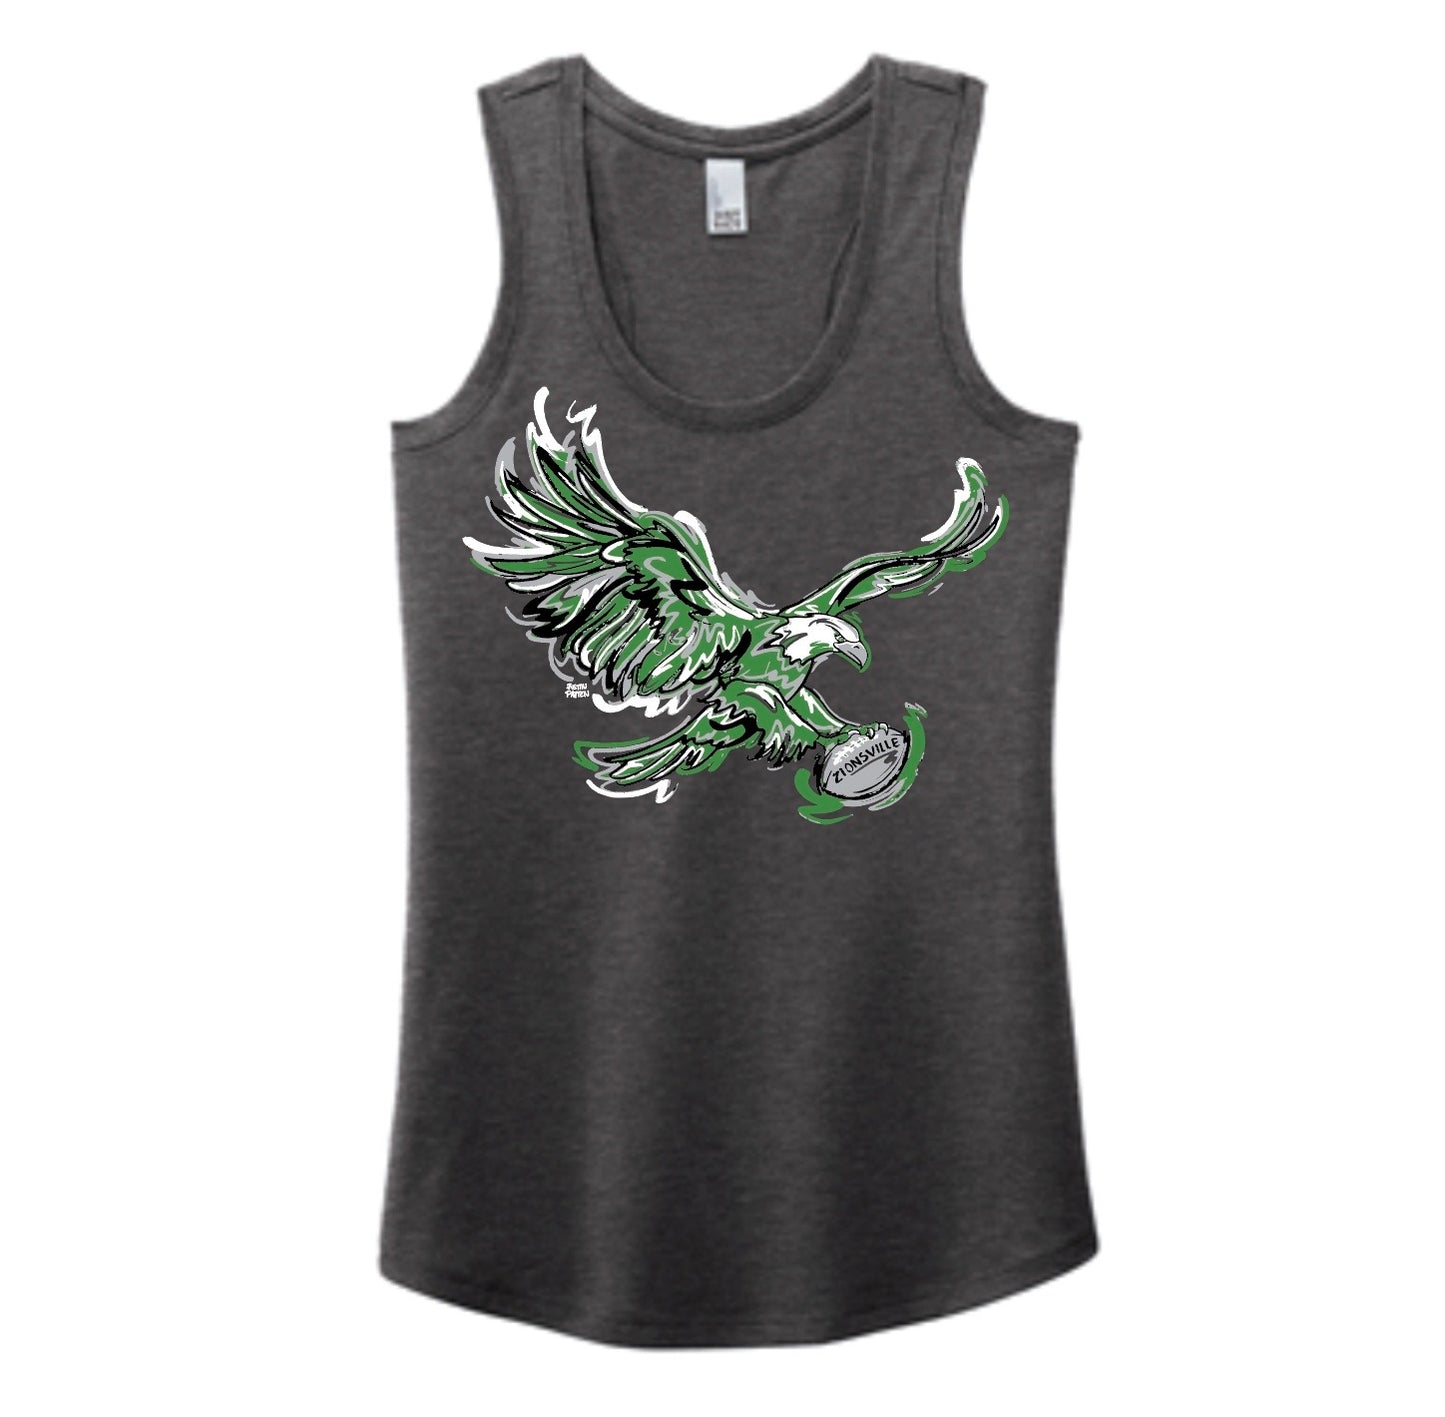 Zionsville Eagle Football Tank by Justin Patten (1 Color)